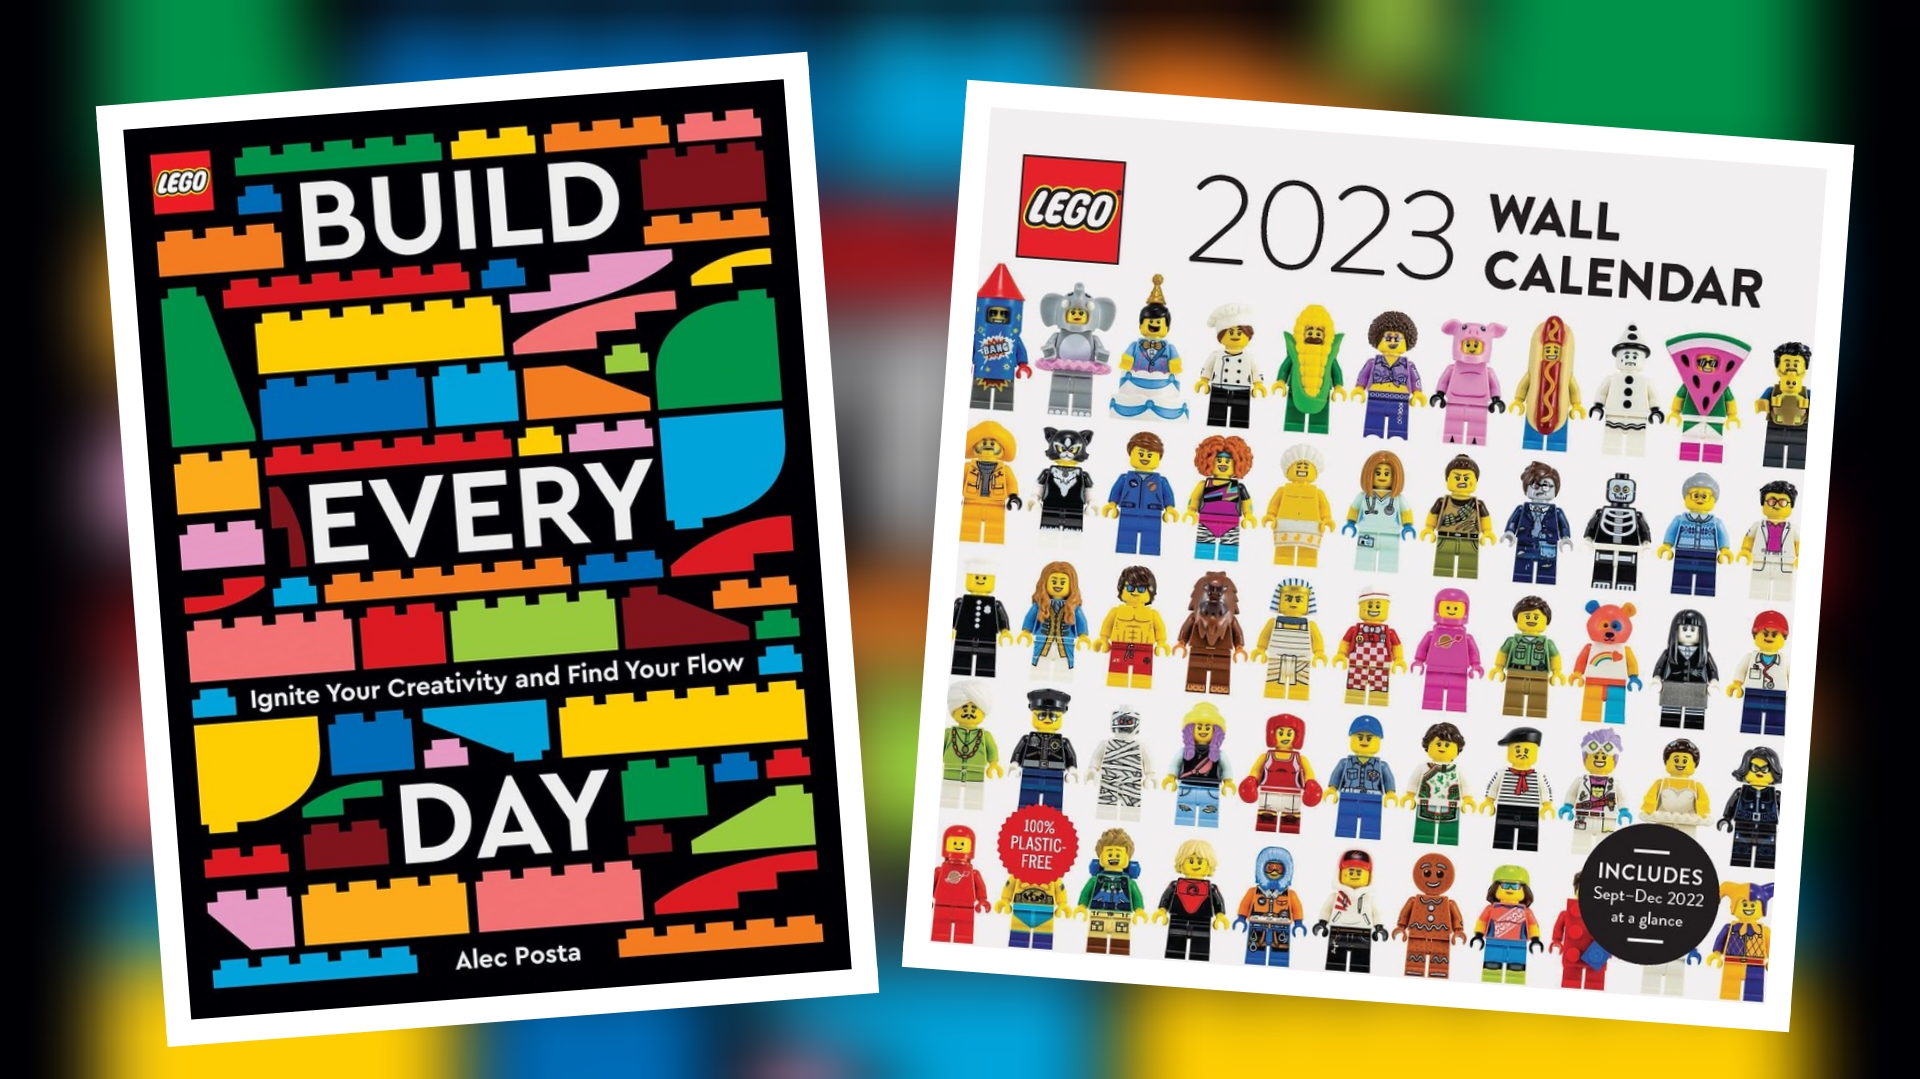 LEGO Build Every Day Book and 2023 Wall Calendar Revealed! The Brick